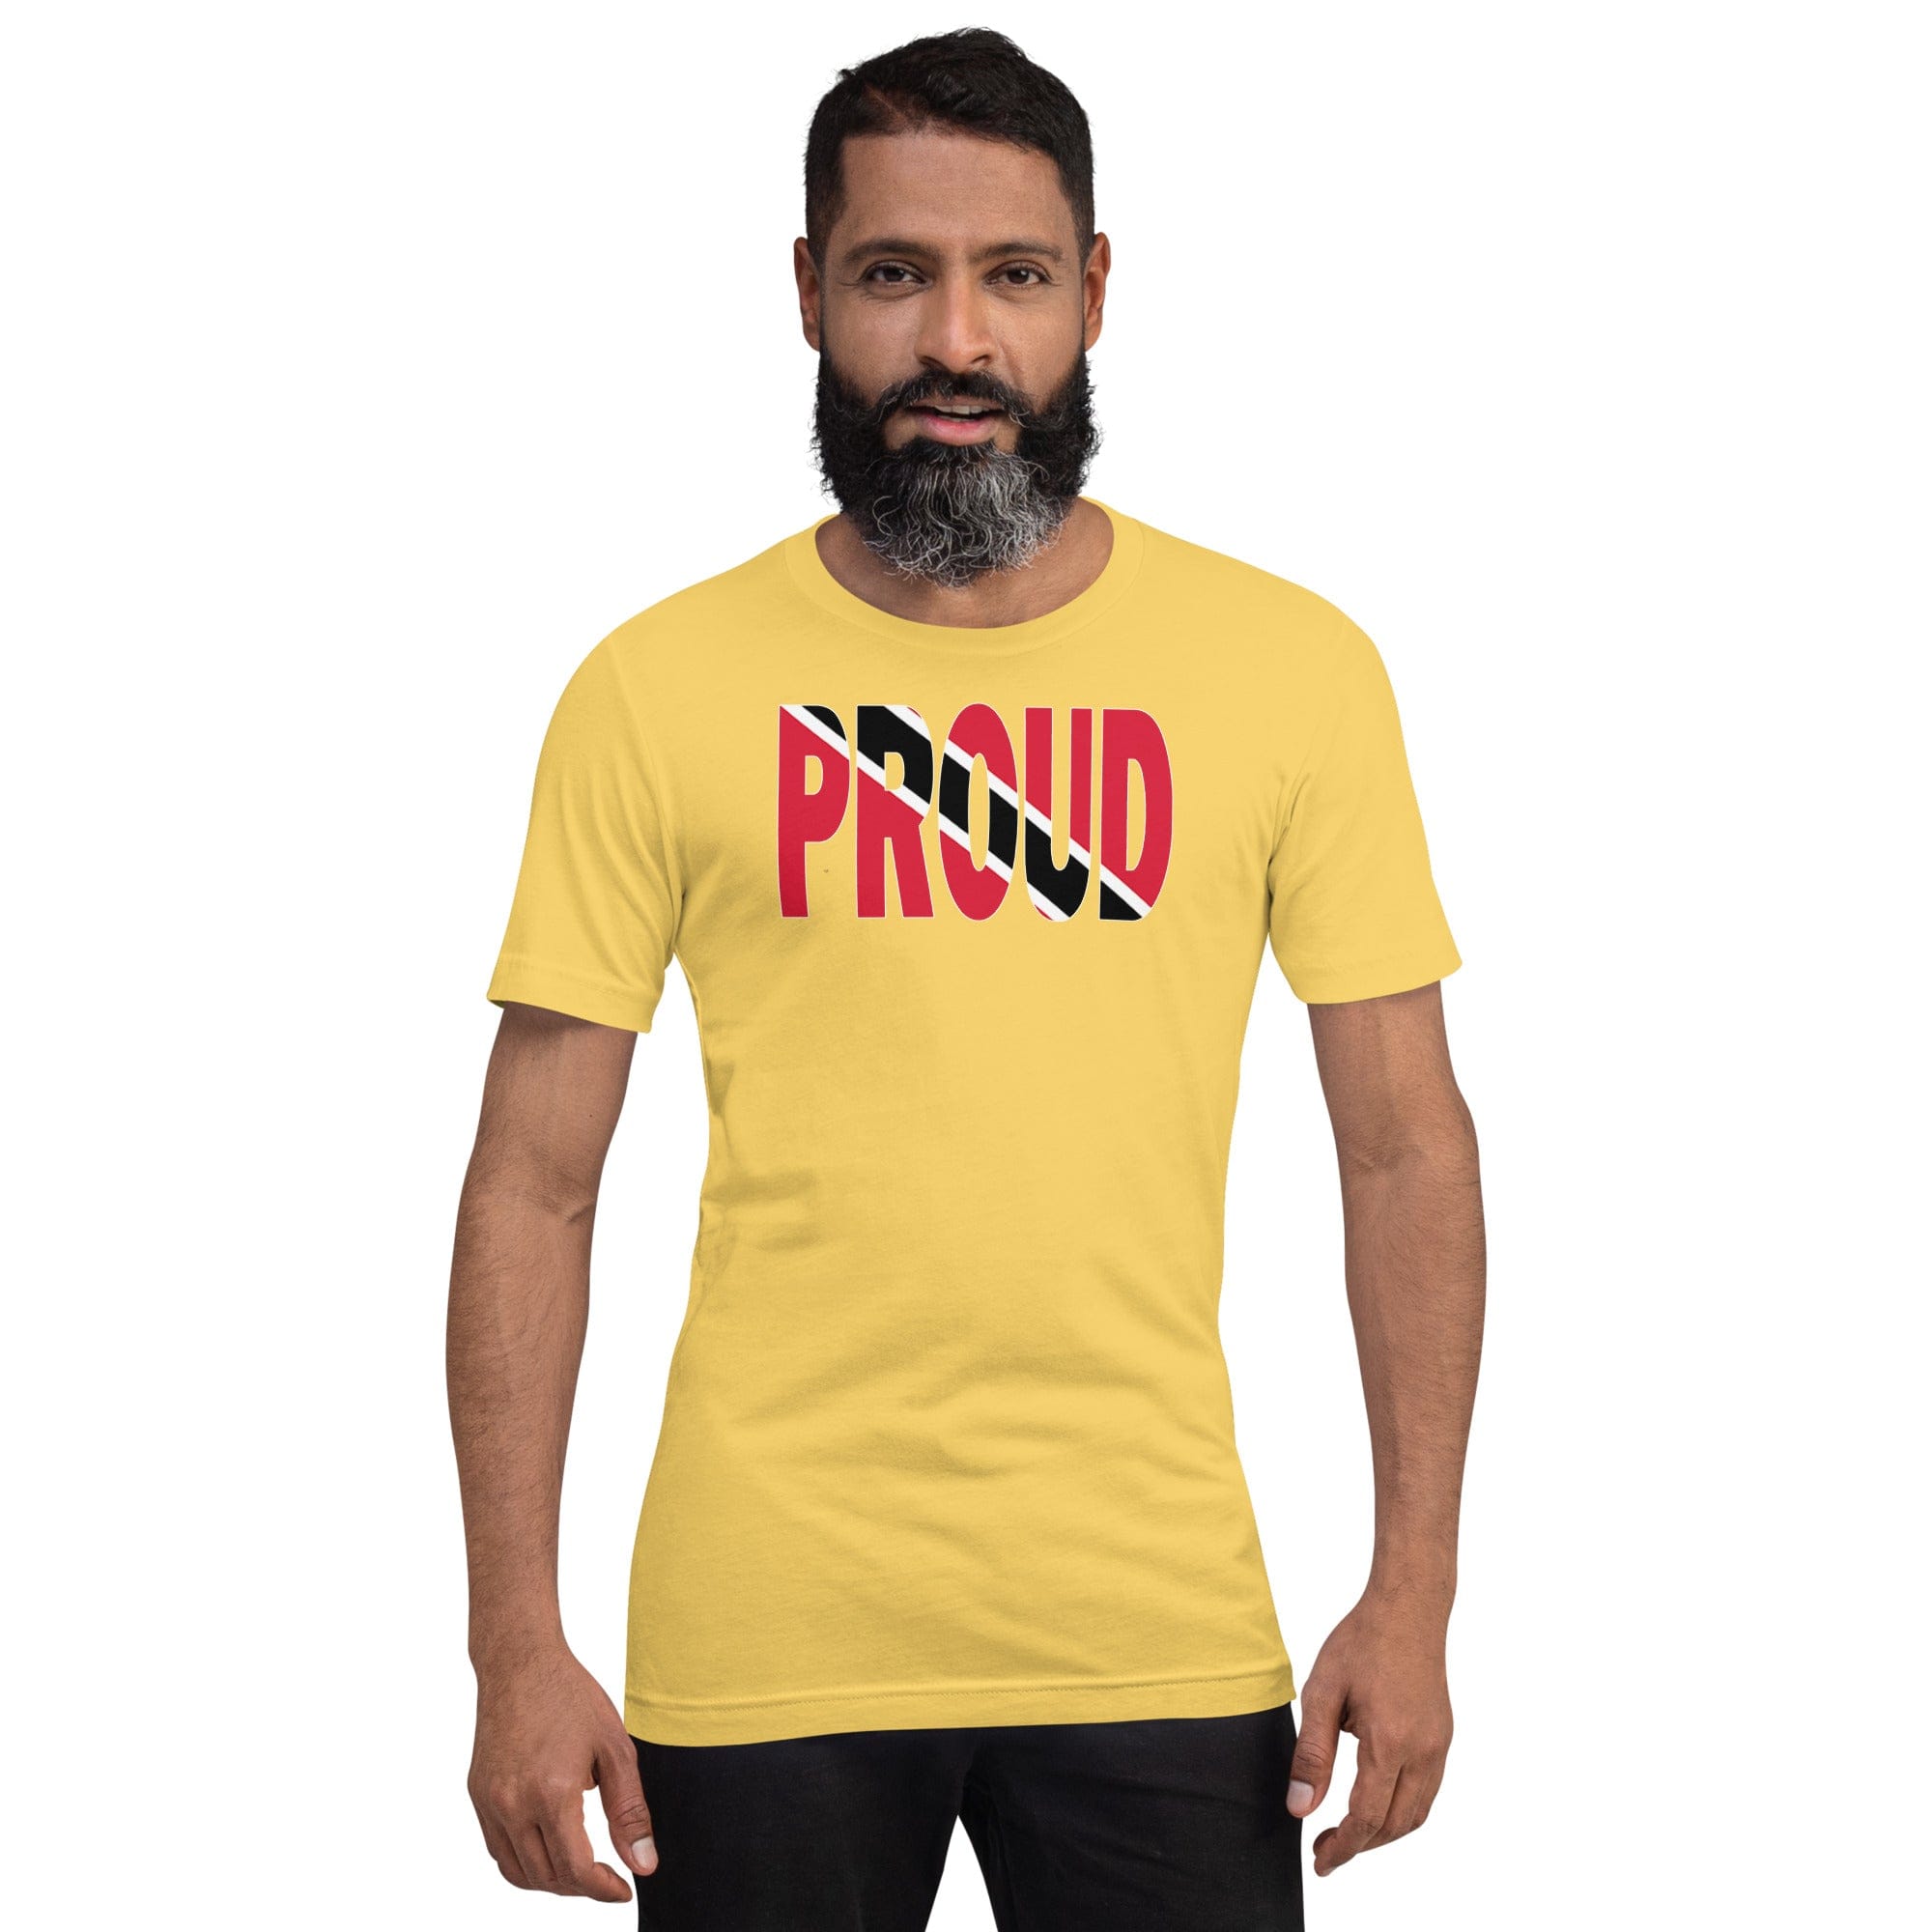 Trinidad Flag designed to spell Proud on a yellow color t-shirt worn by a black man.